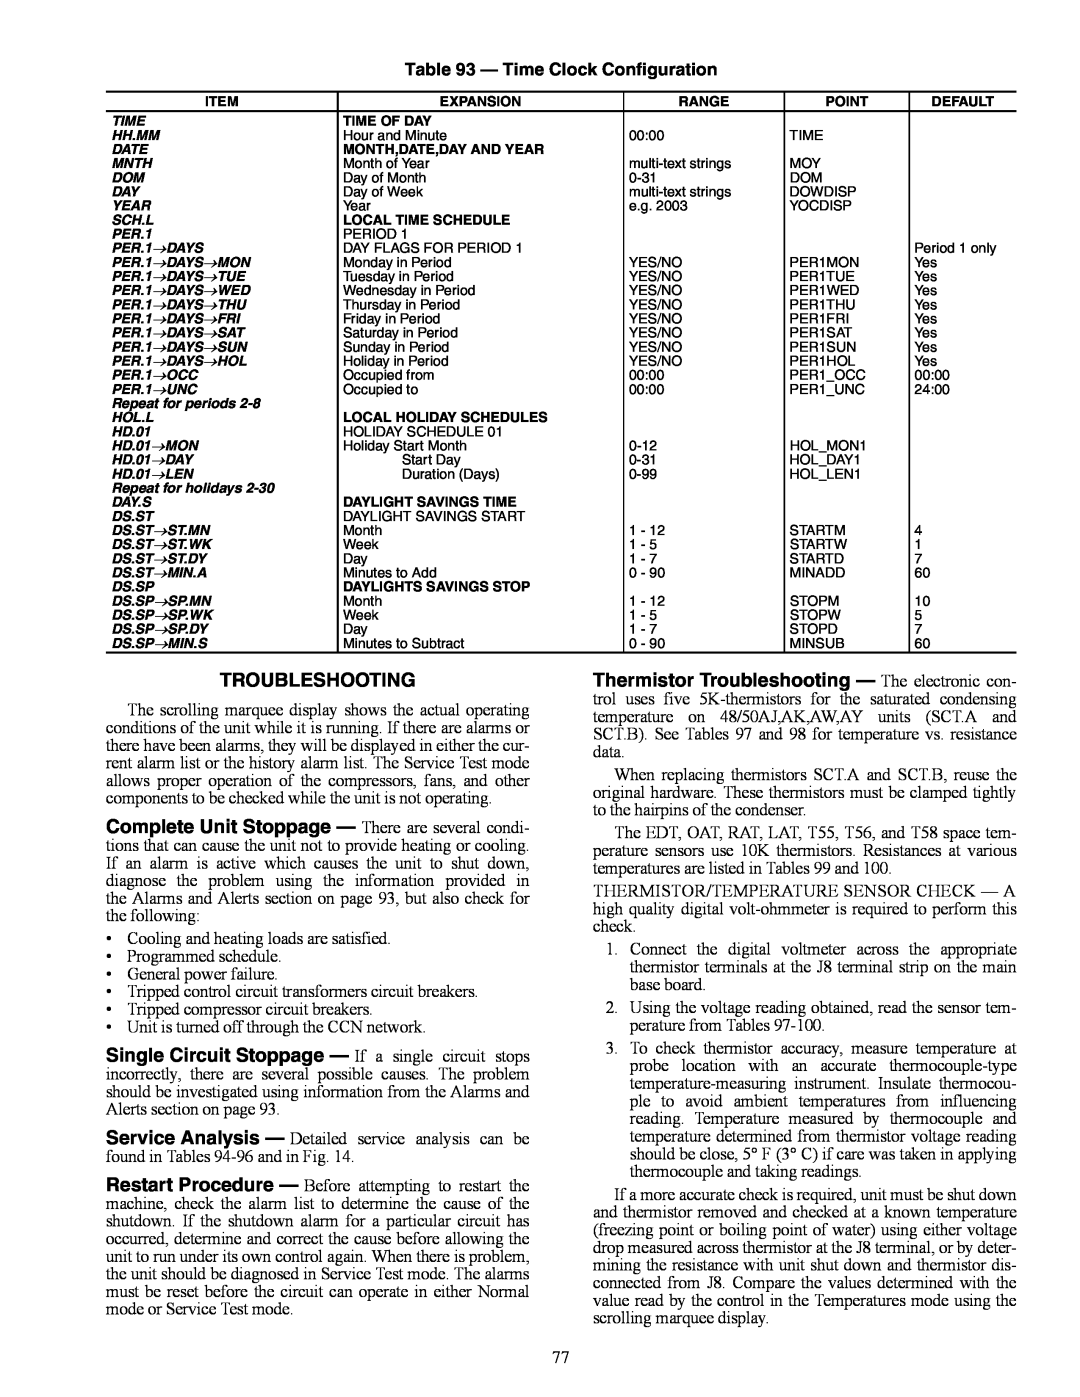 Carrier 48/50AJ specifications Troubleshooting 